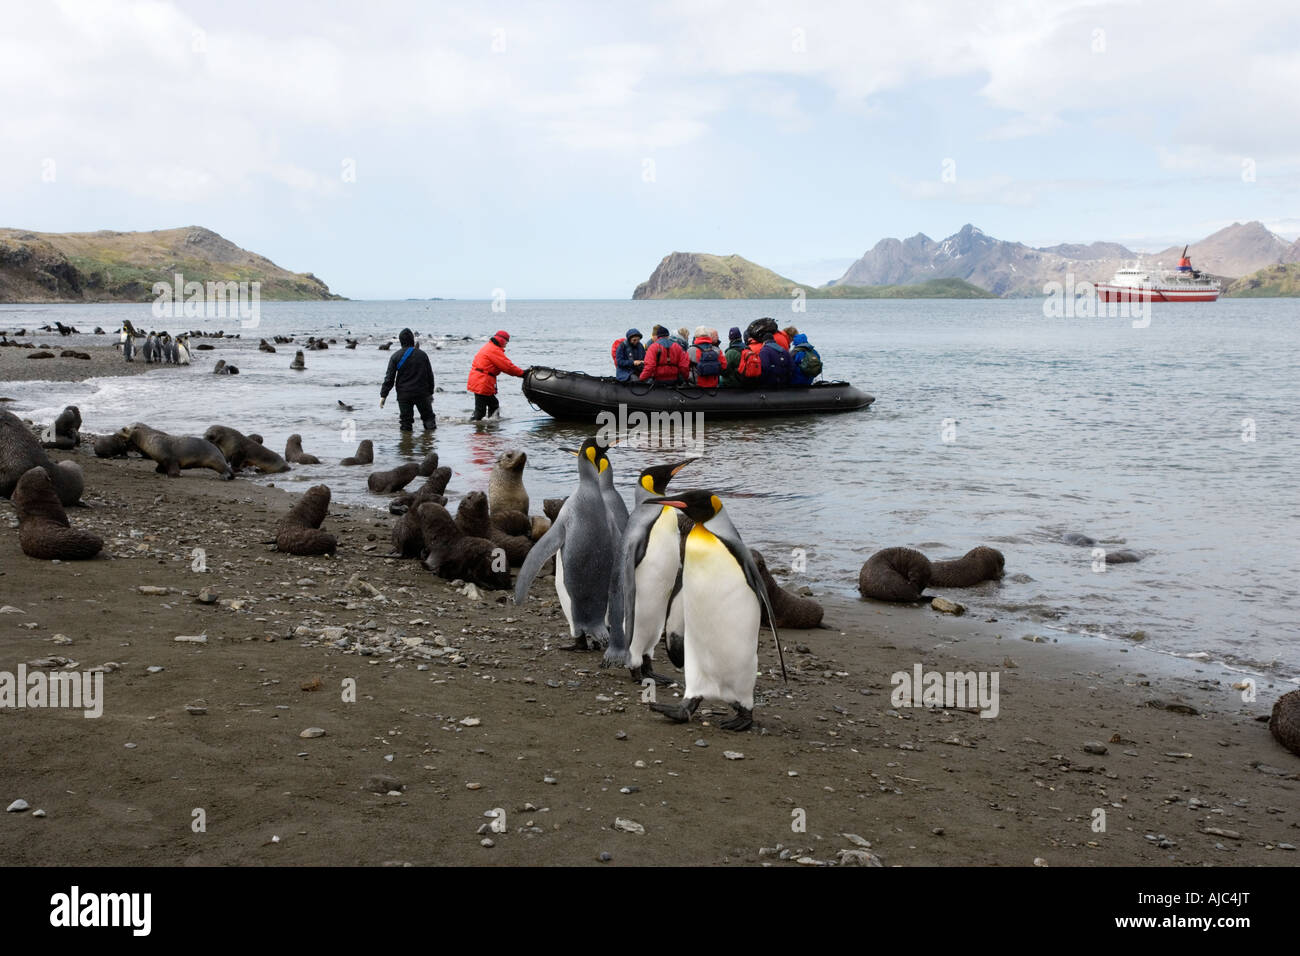 King Penguins (Aptenodytes patagonica) with Tourists Landing in the Background Stock Photo